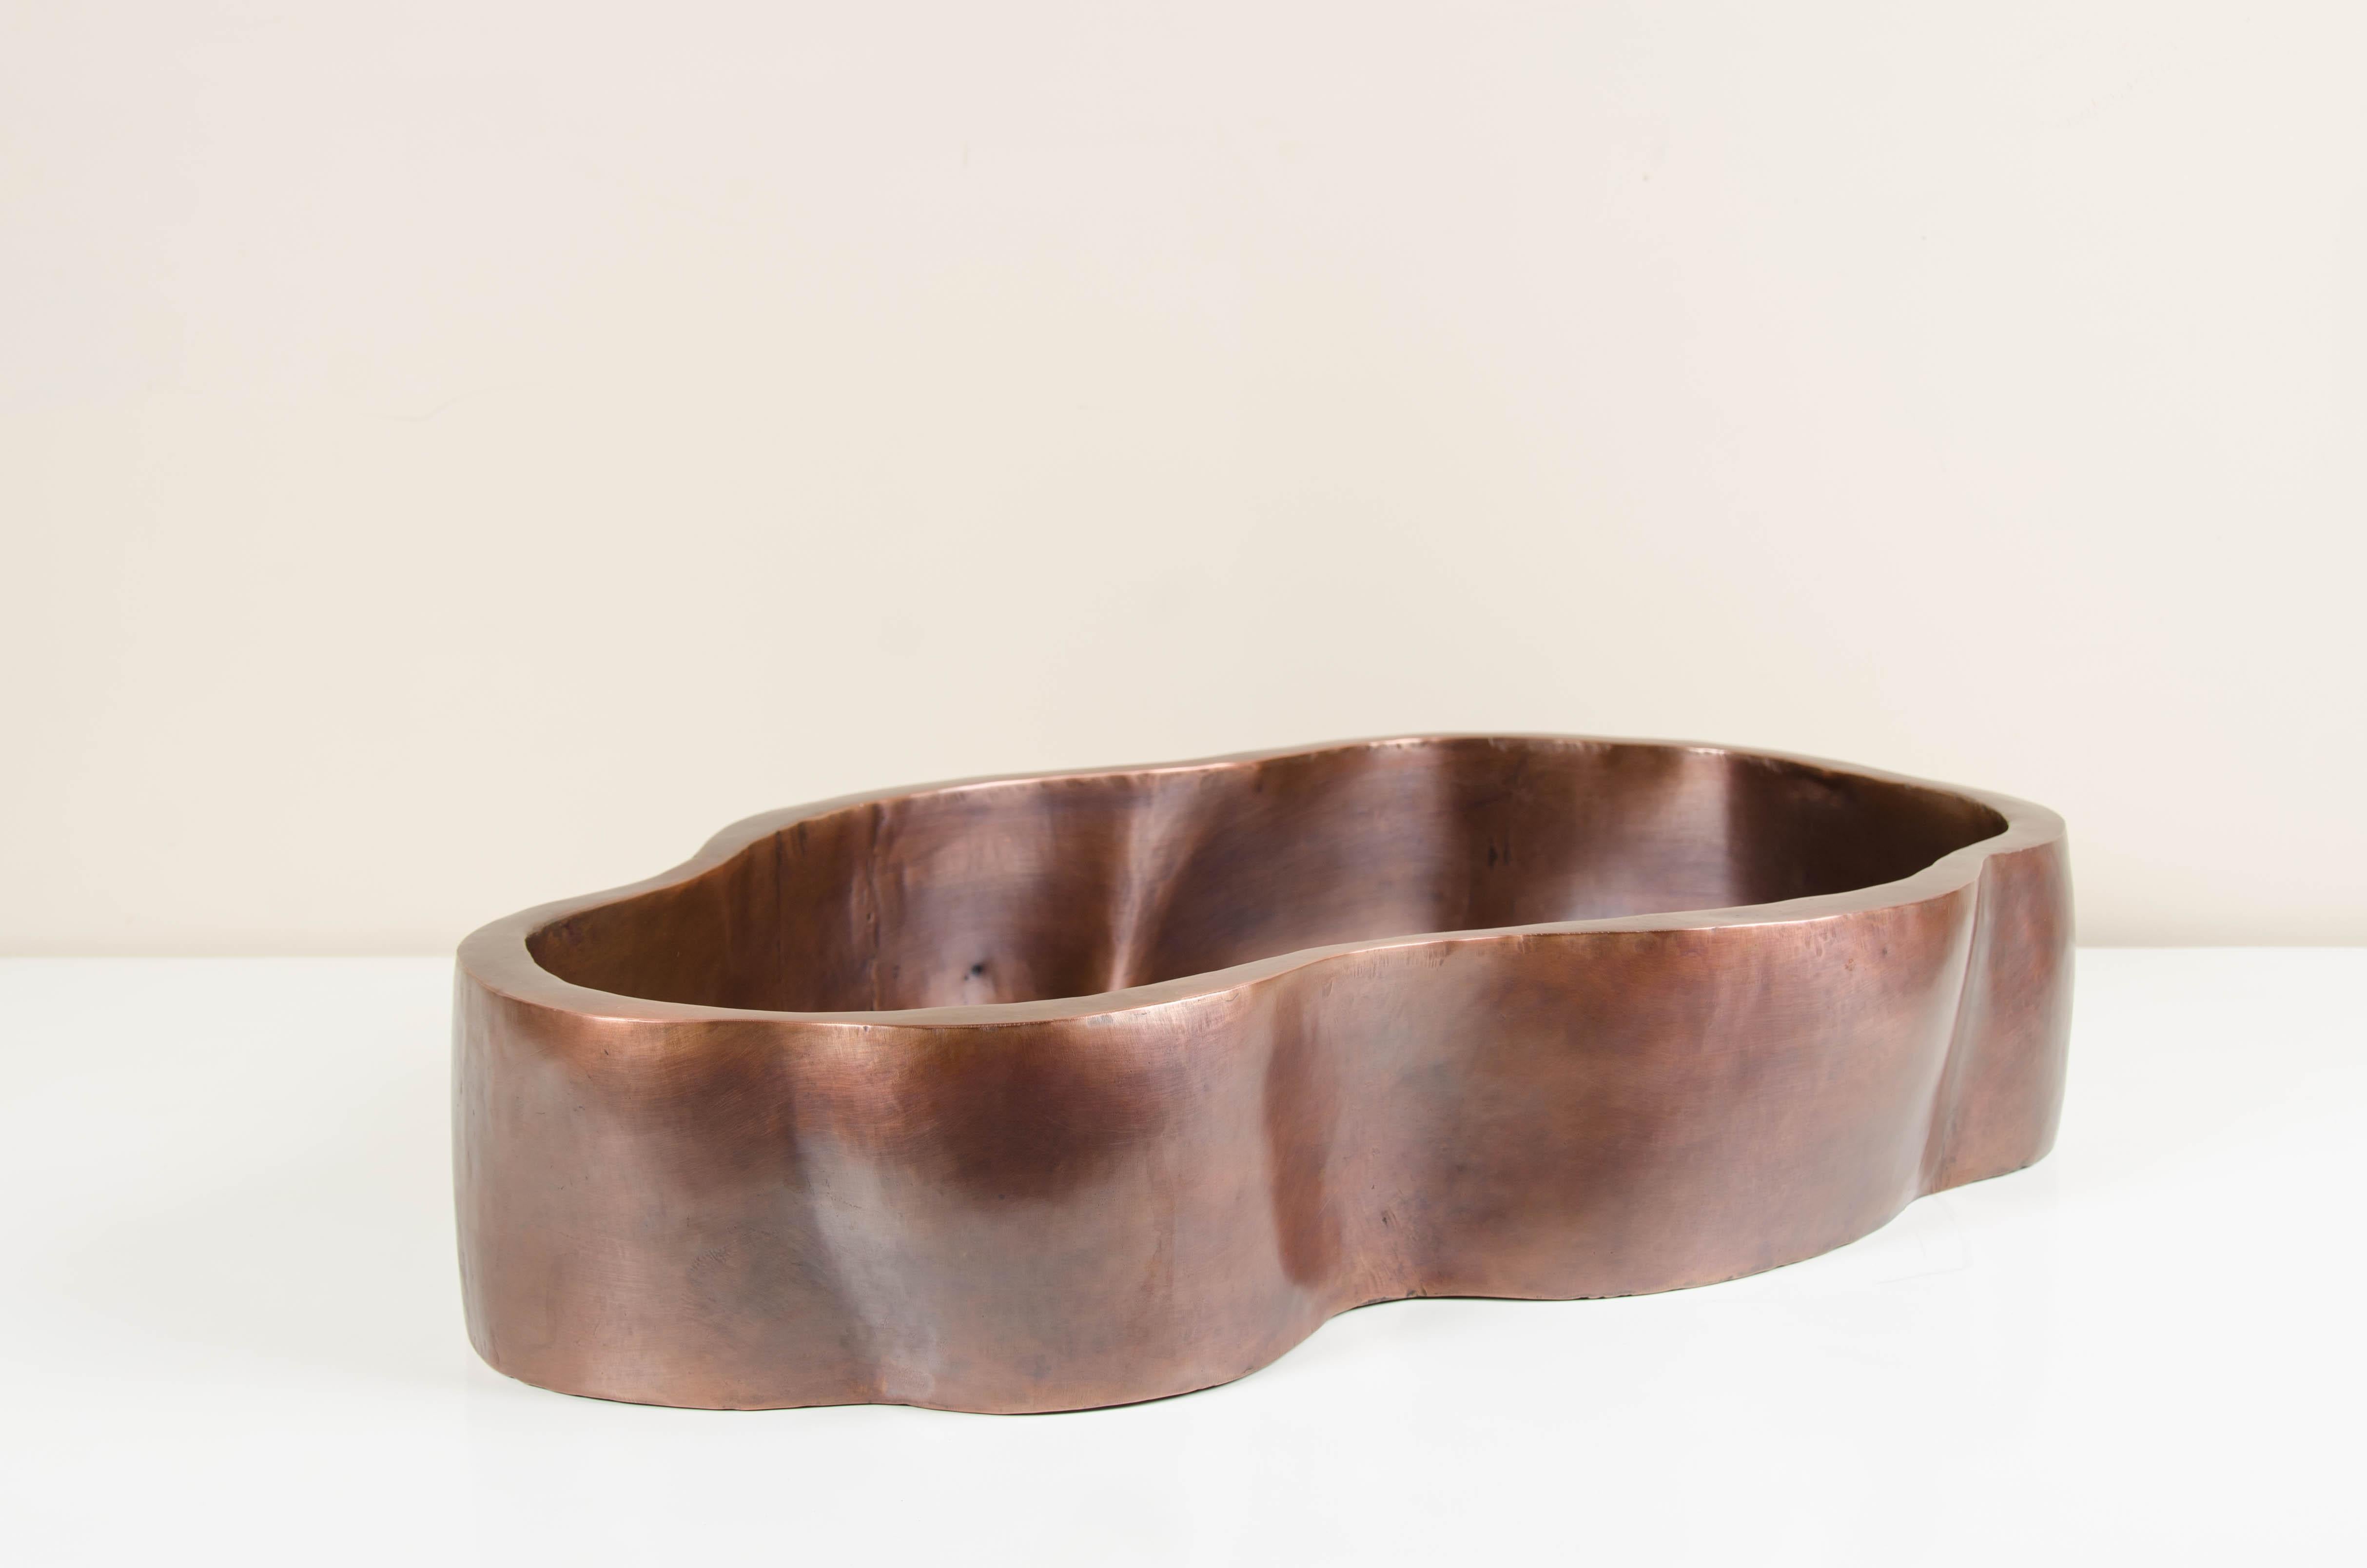 Repoussé Root Shape Oblong Low Cachepot, Antique Copper by Robert Kuo, Limited Edition For Sale